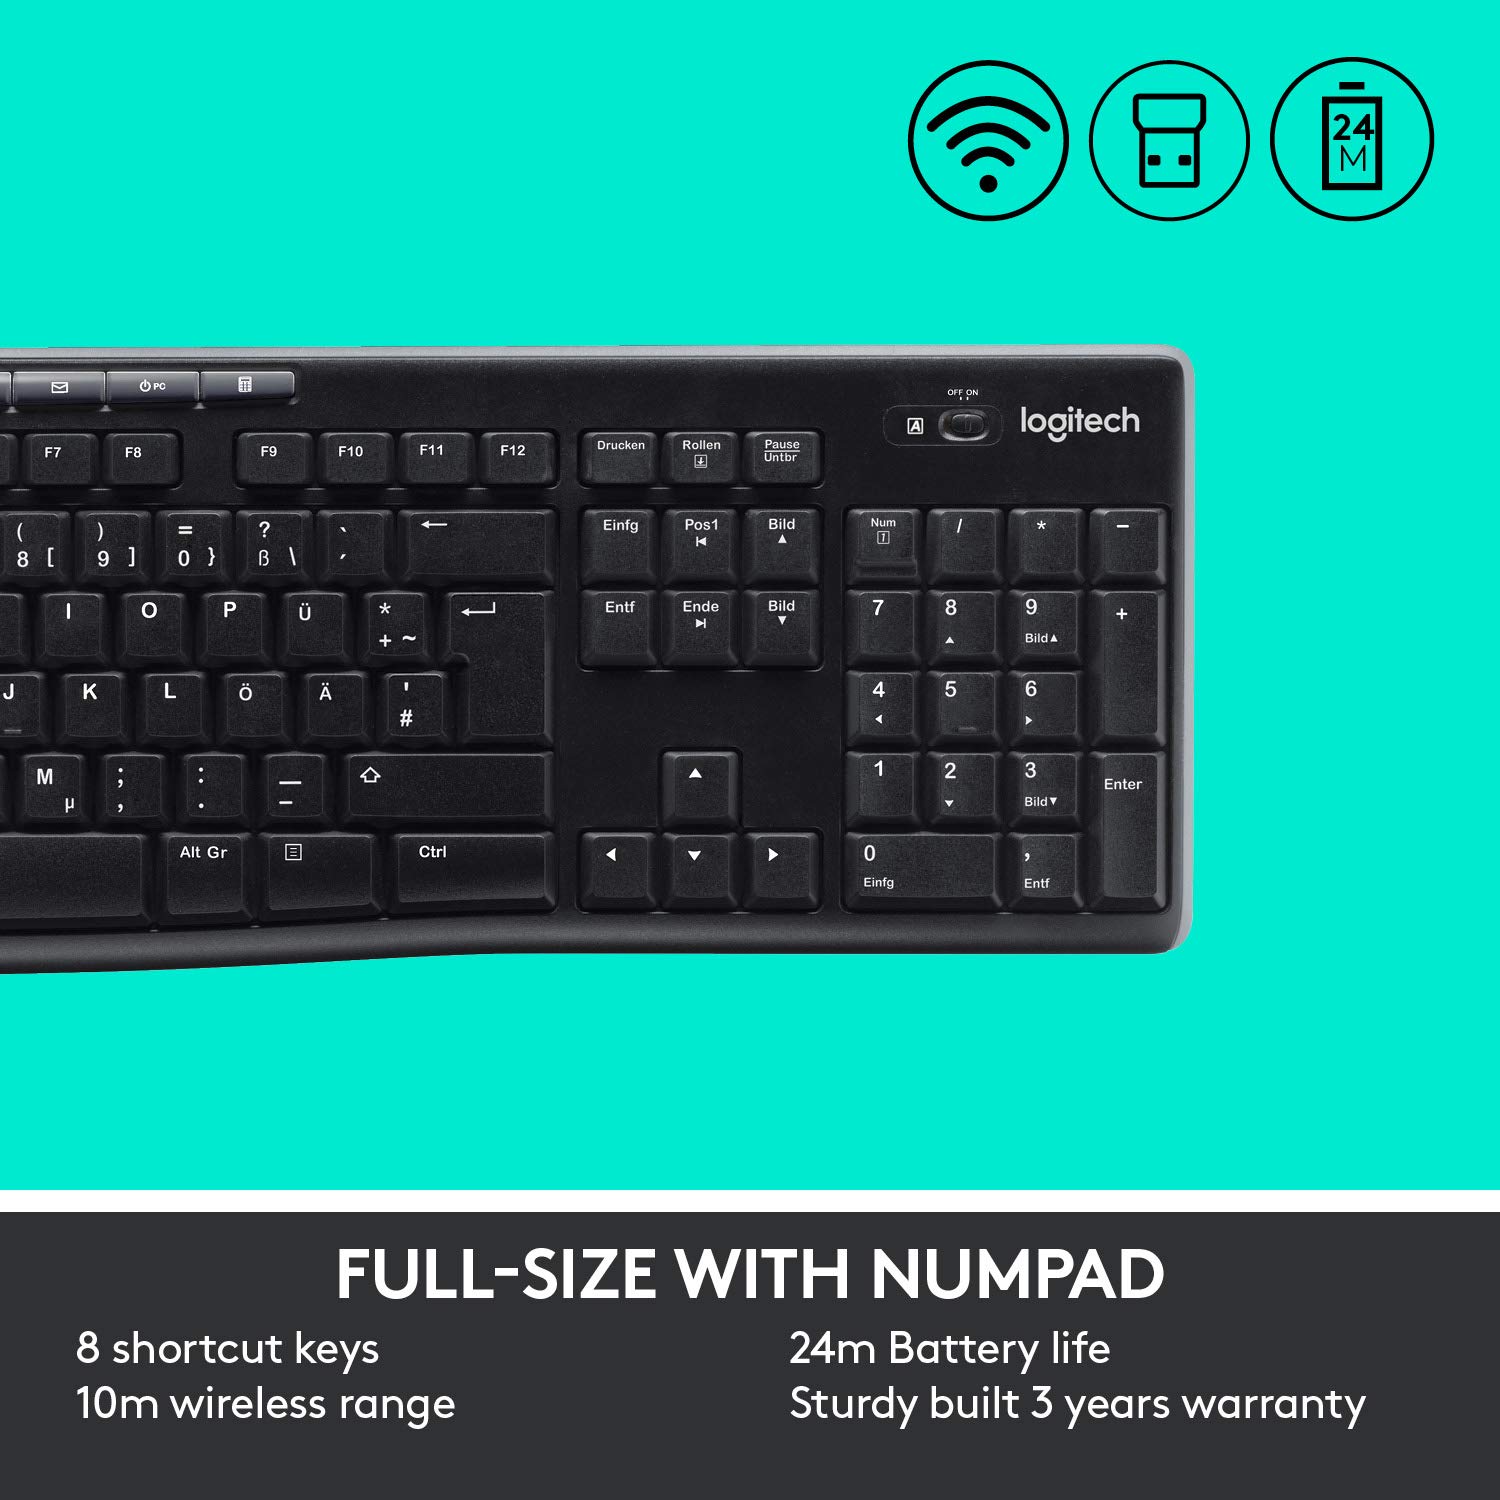 Logitech MK270 Wireless Keyboard and Mouse Combo — Keyboard and Mouse Included